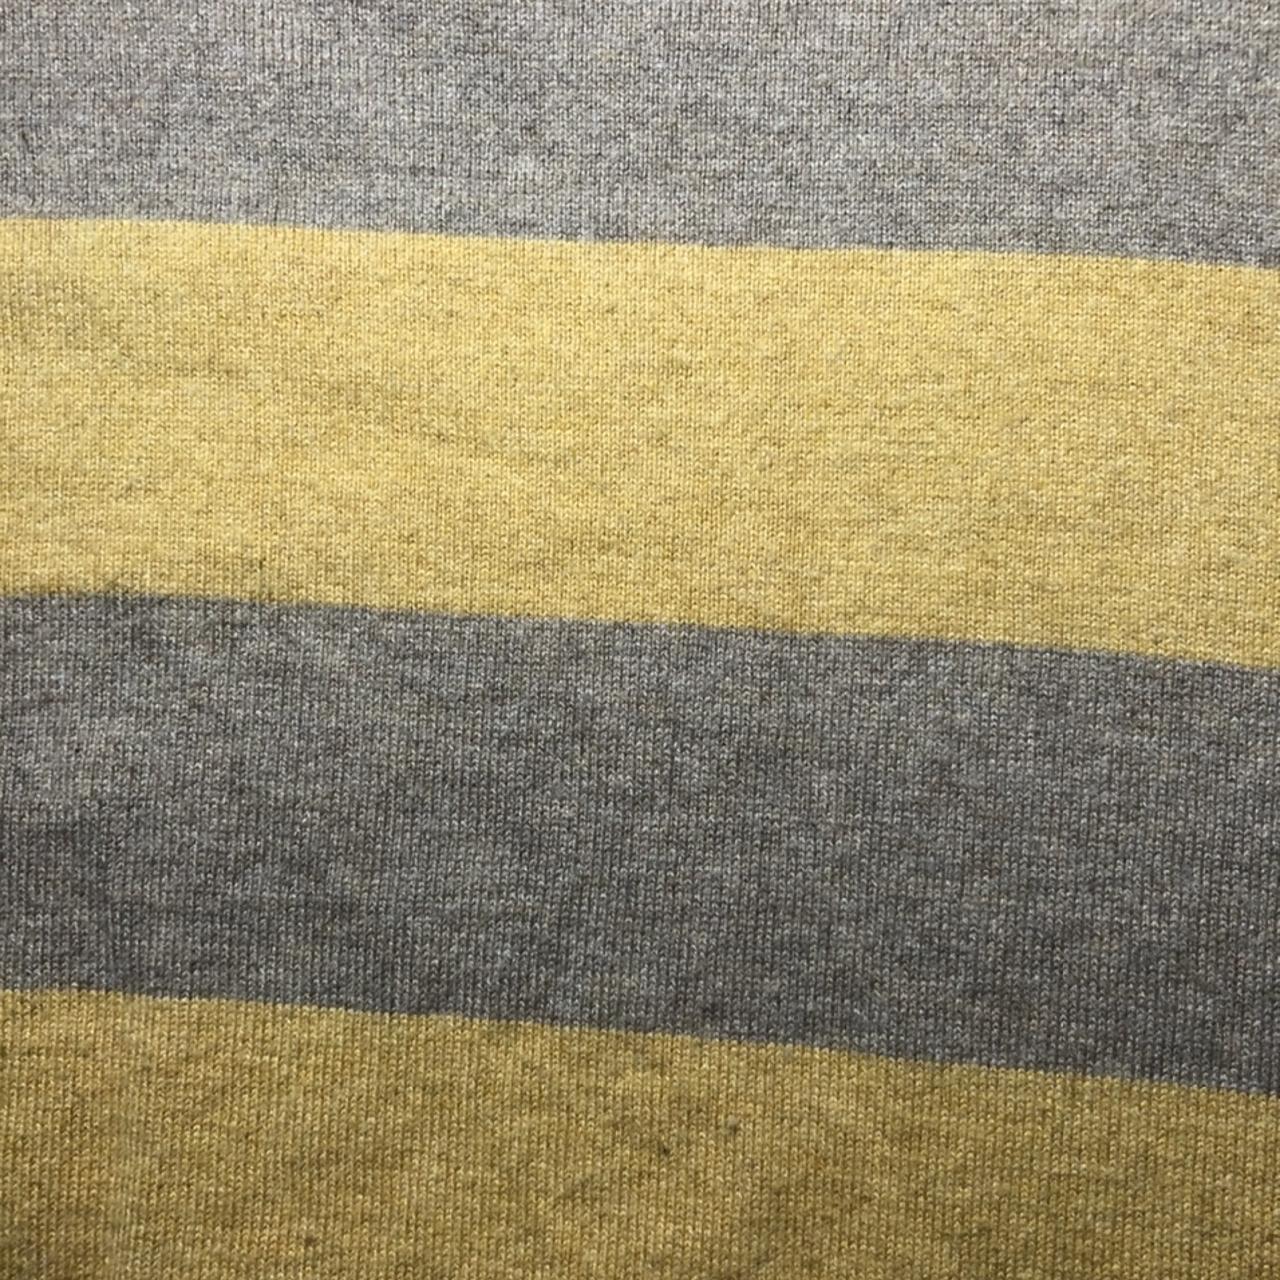 Product Image 2 - Perry Ellis Lightweight Sweater 

Striped